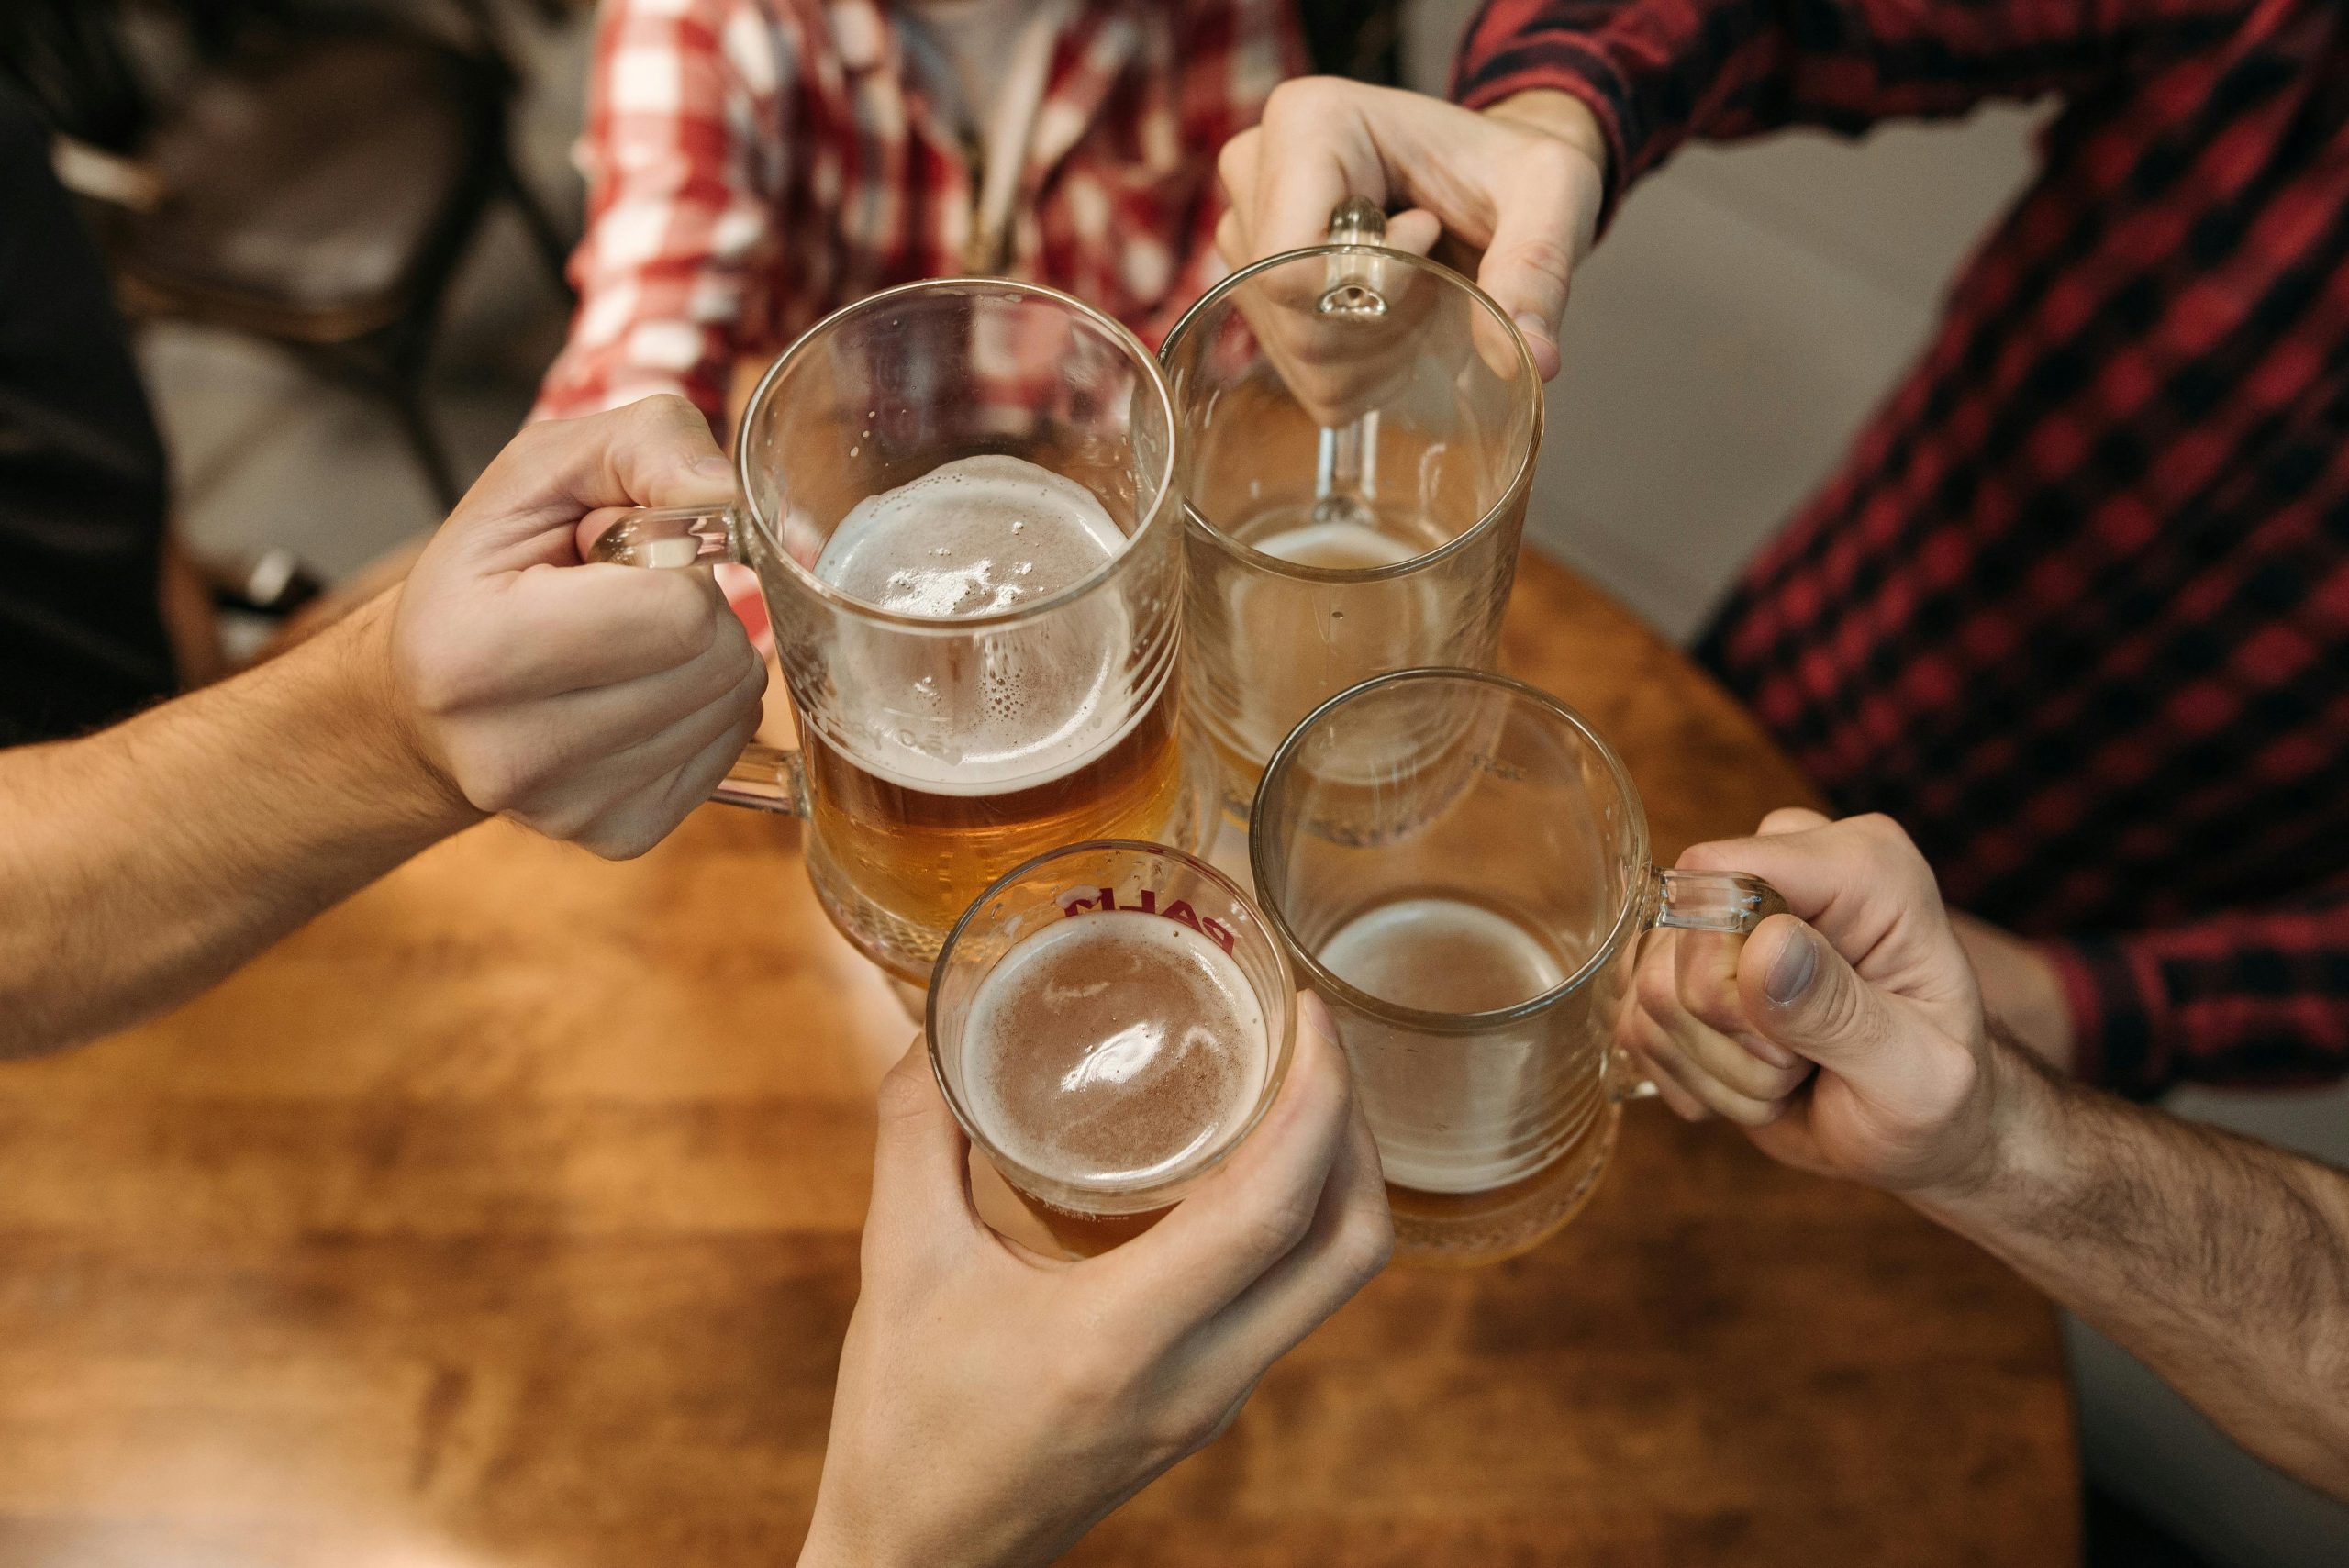 arms toasting with glasses and mugs filled with beer